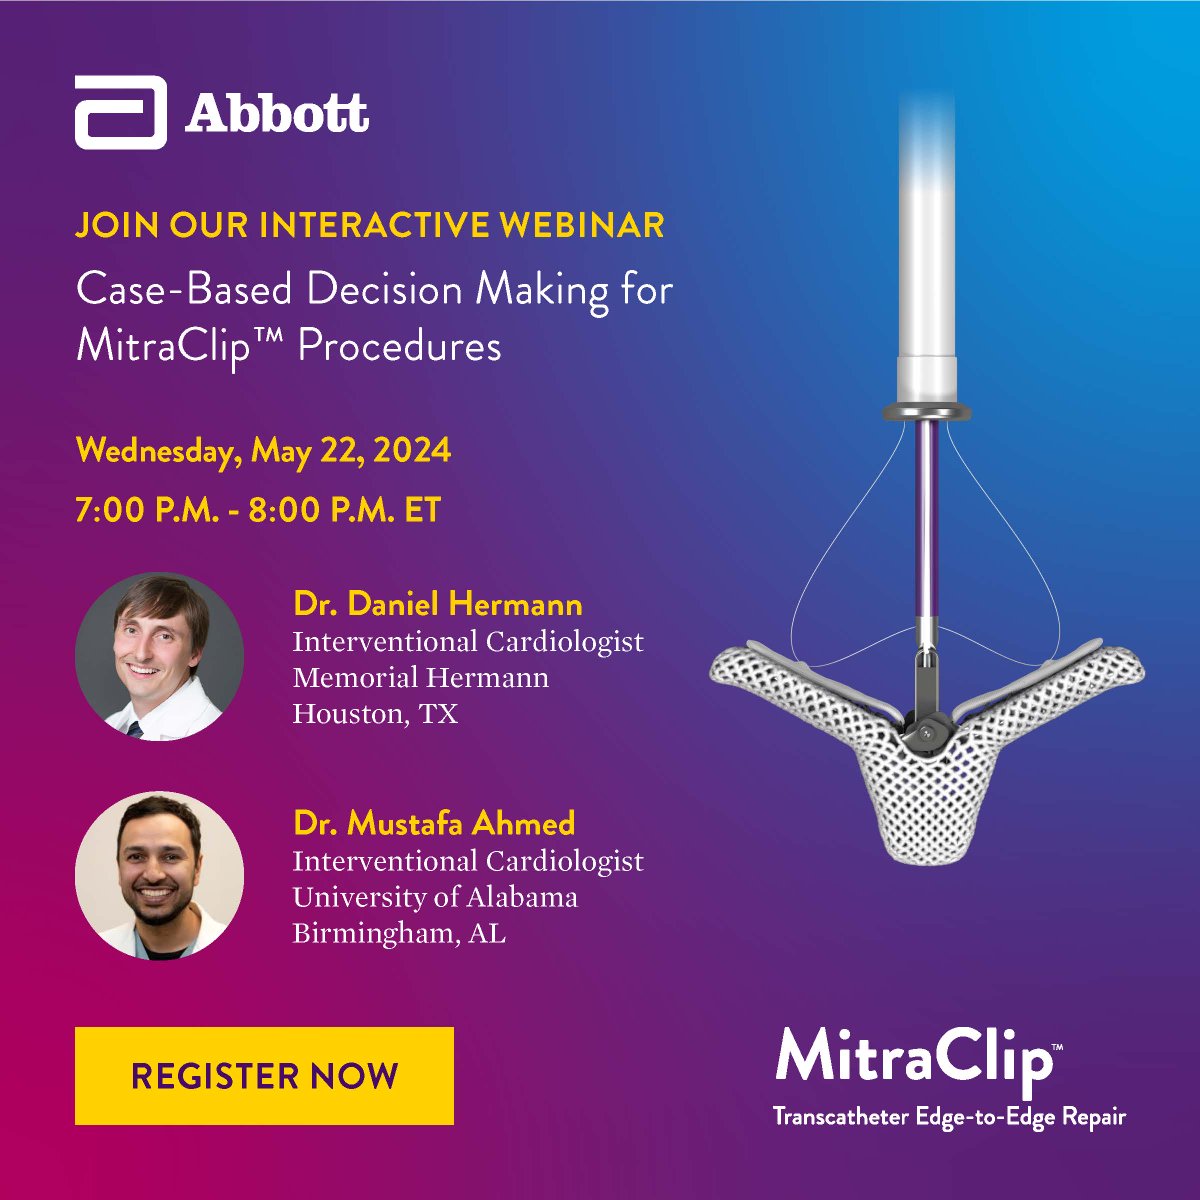 It’s almost time! Don’t forget to register for this dynamic event hosted on May 22 with Interventional Cardiologists Daniel Hermann and @MustafaAhmedMD! ➡️ Register: abbo.tt/MCAcademicDev Safety Info: abbo.tt/MitraClipISI #MitralRegurgitation #CardioTwitter #MitraClip